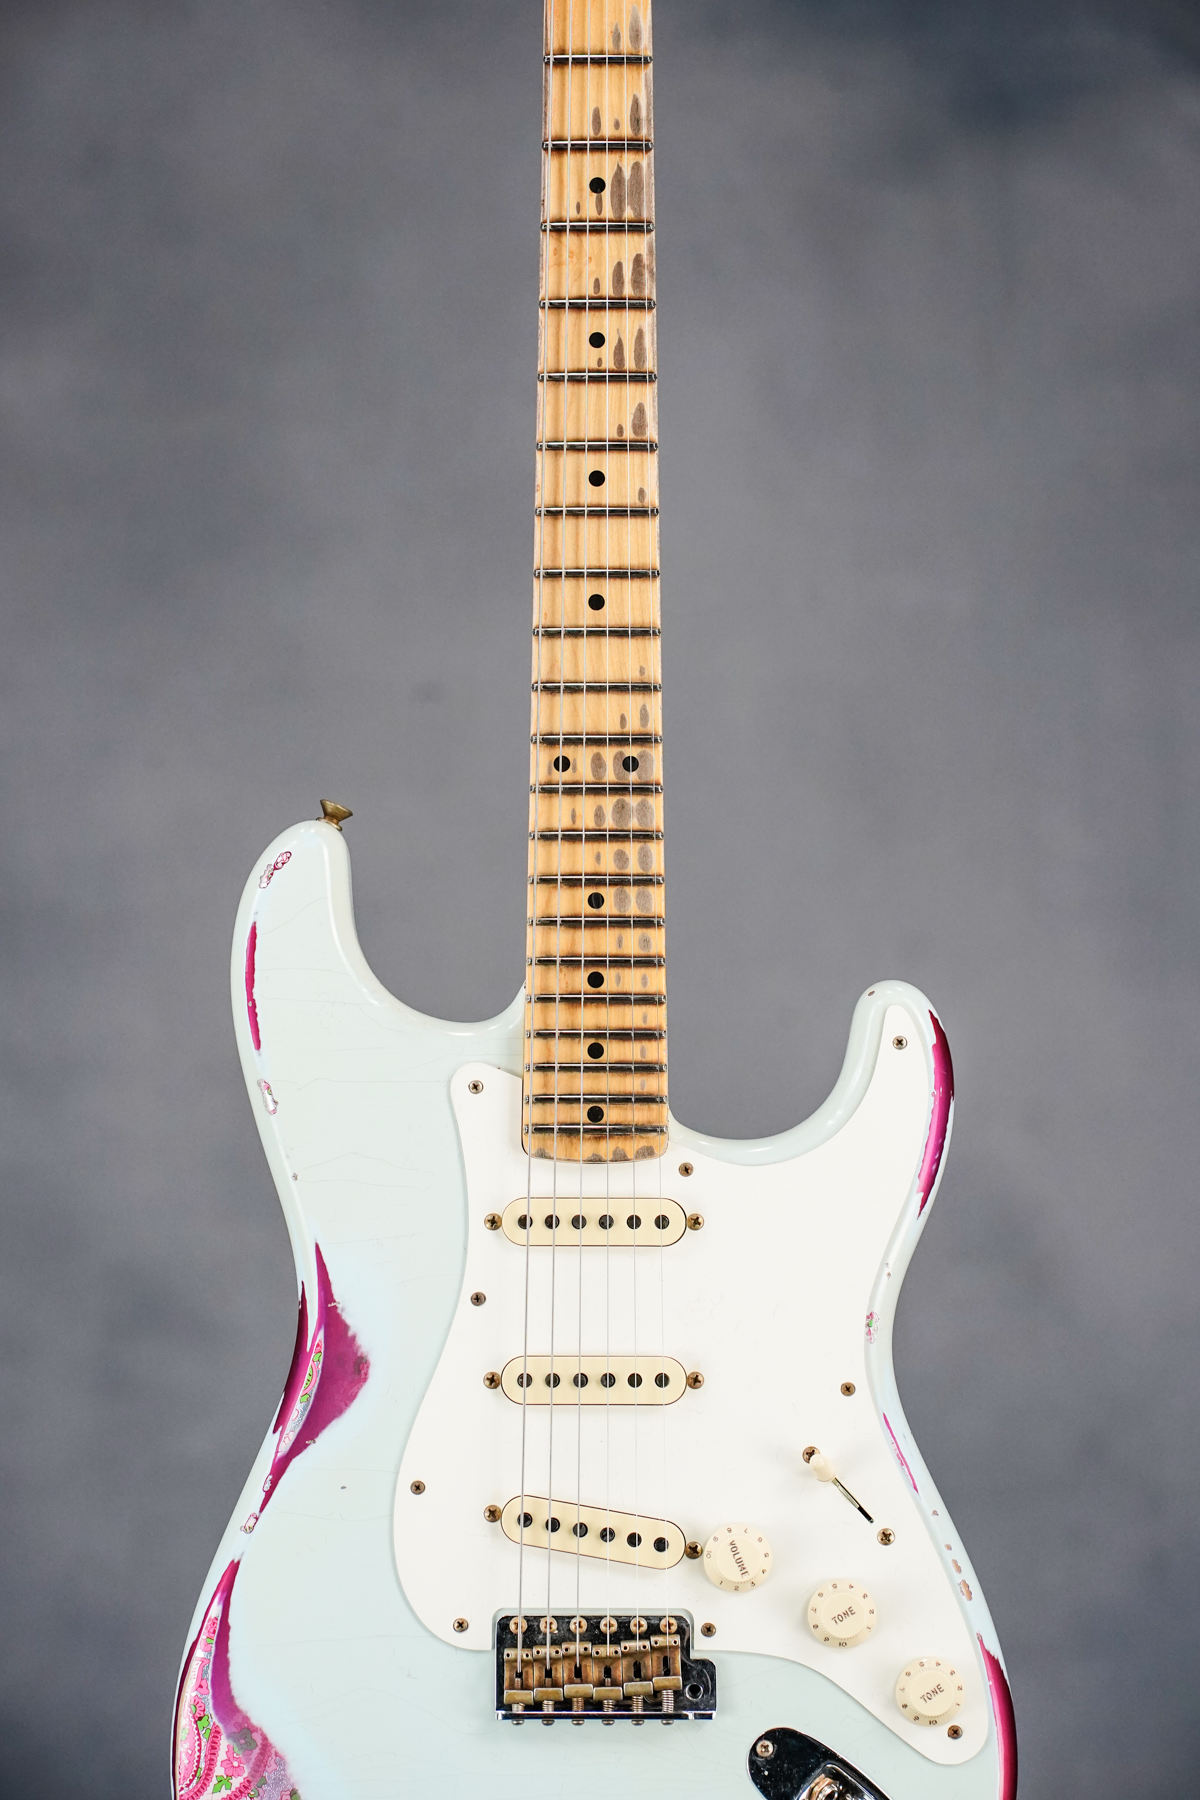 LTD MISCHIEF MAKER - HEAVY RELIC, SUPER FADED AGED SONIC BLUE OVER PINK PAISLEY